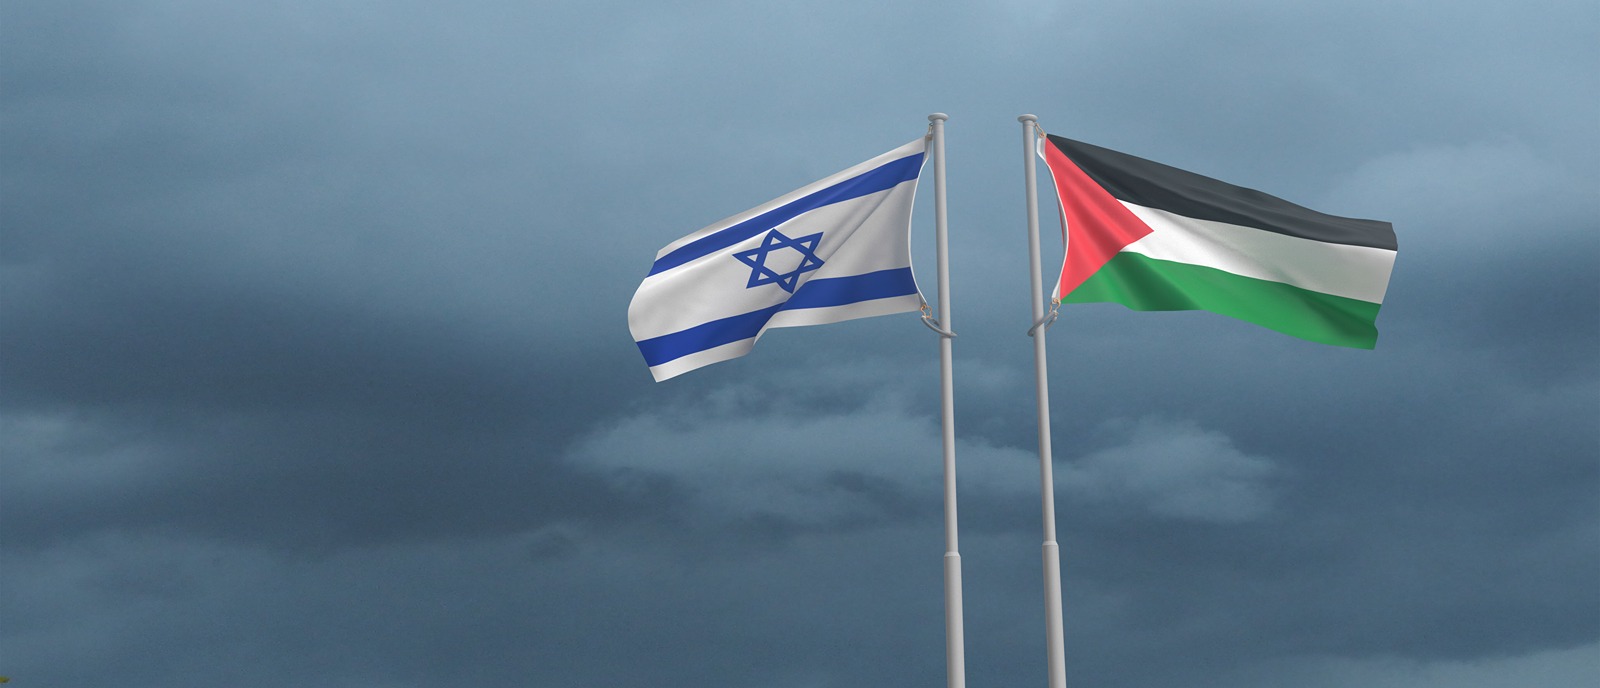 Palestine and Israel Flags flying high